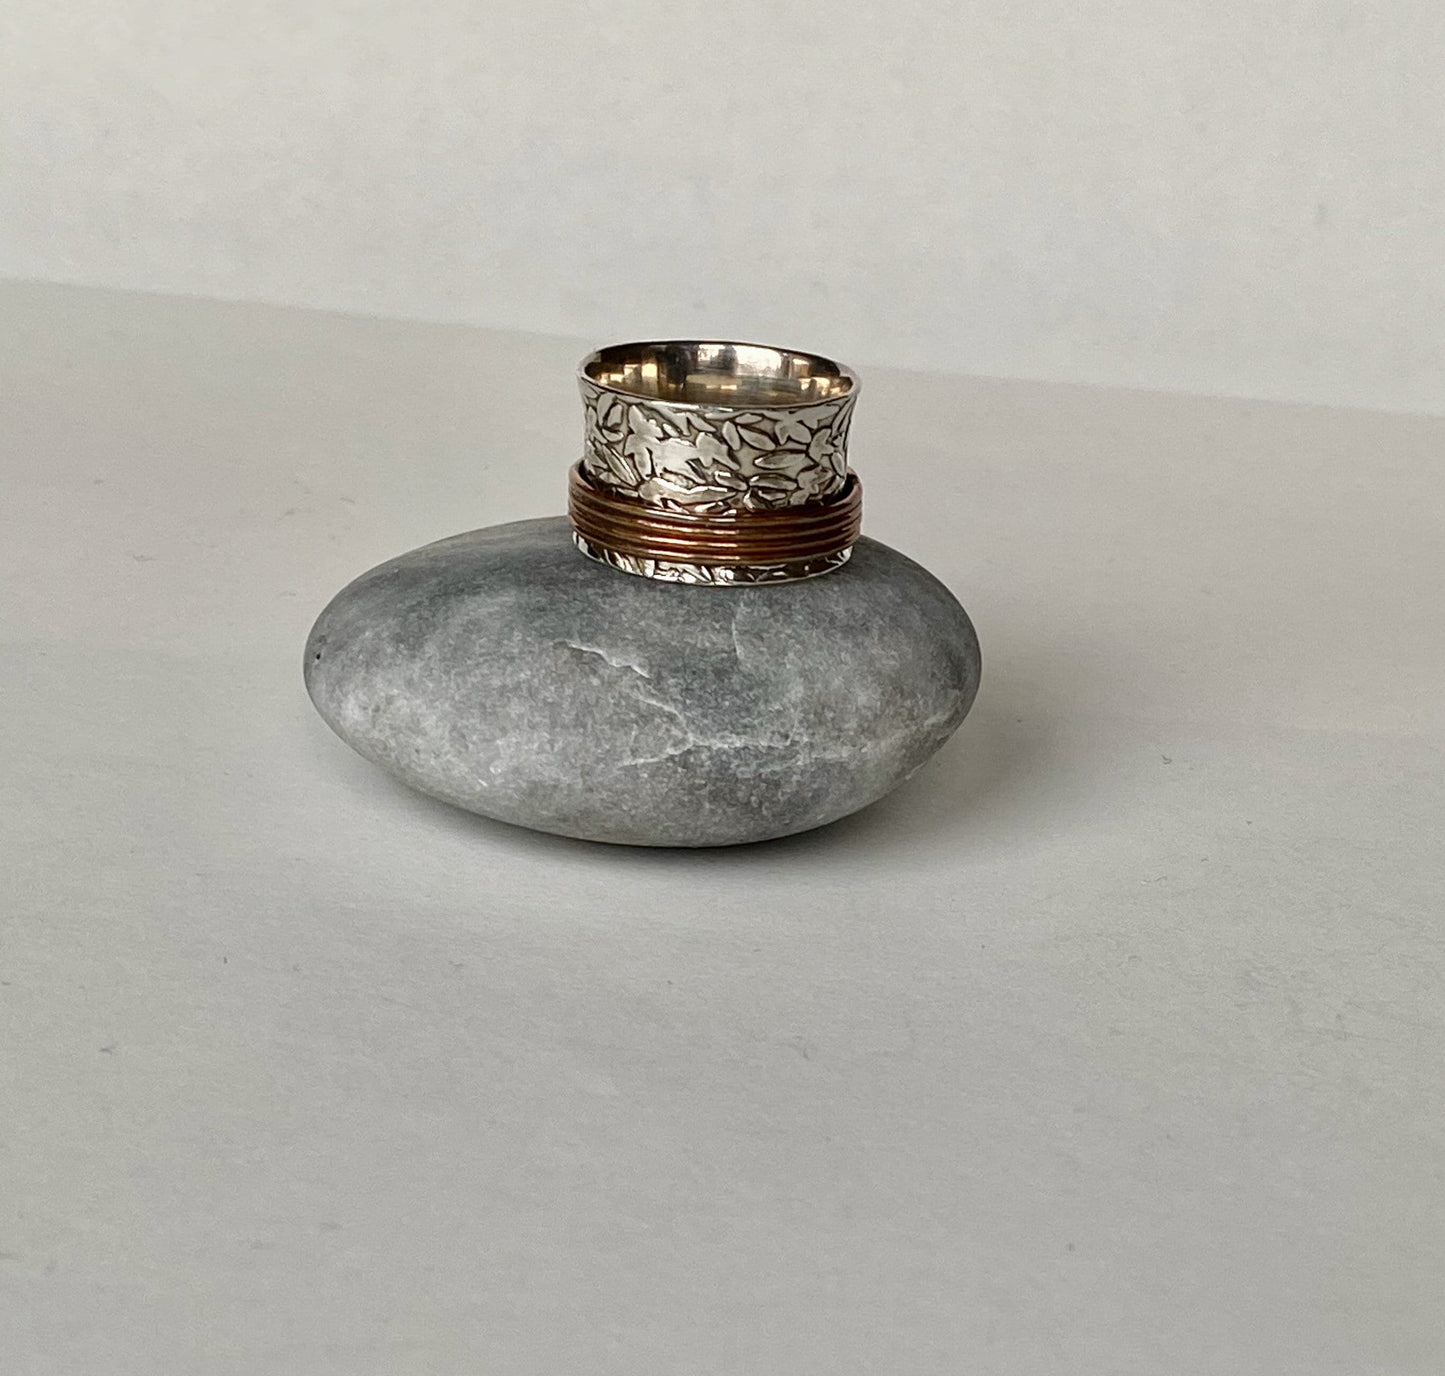 Handmade size 7 sterling silver and copper spinning ring.